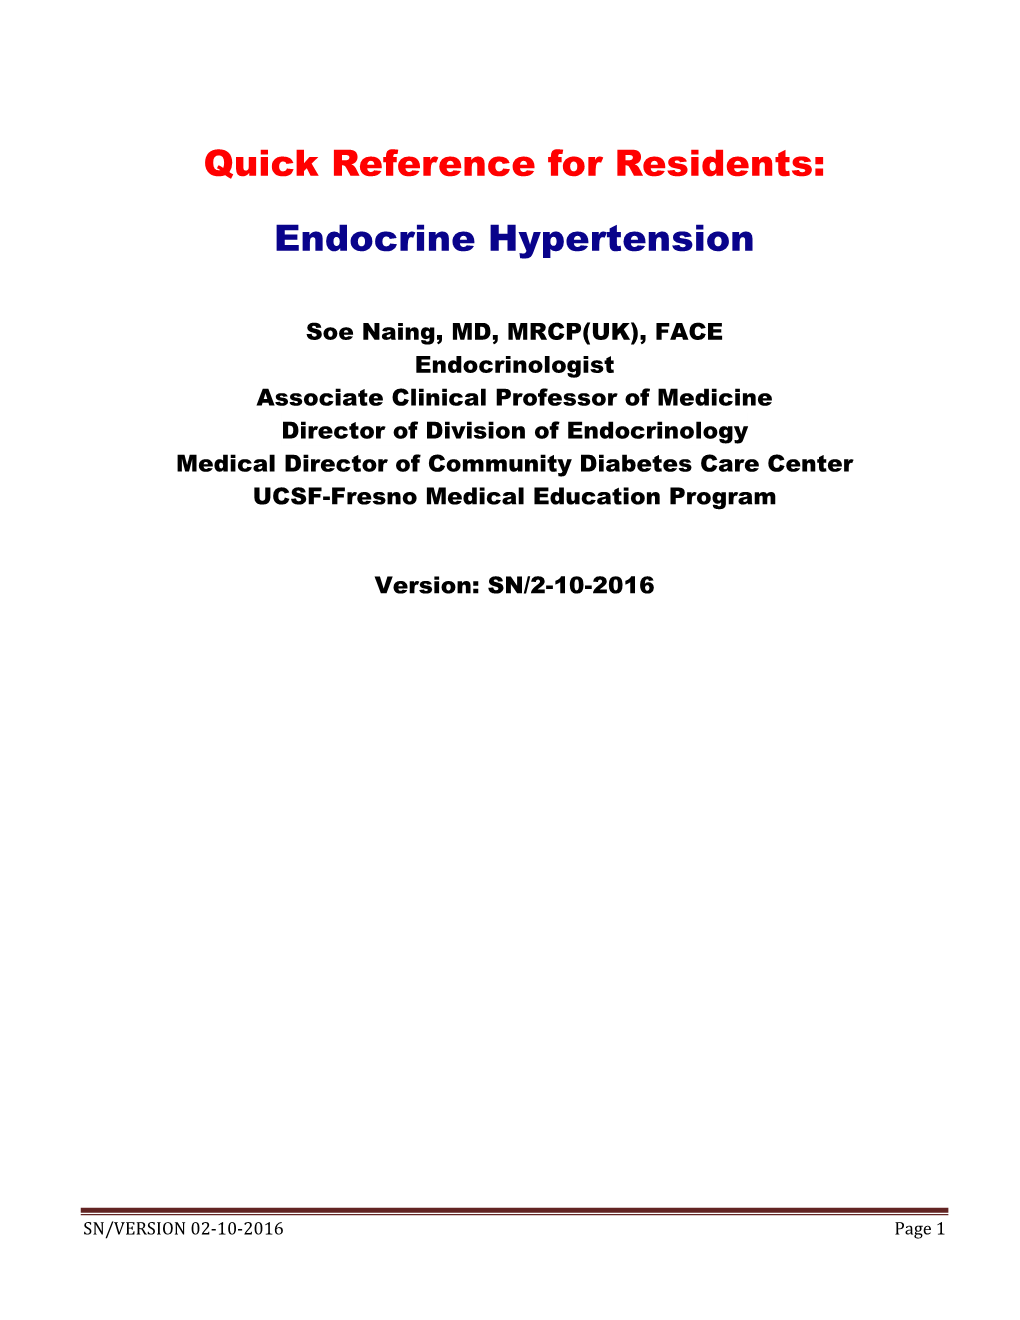 Quick Reference for Residents: Endocrine Hypertension